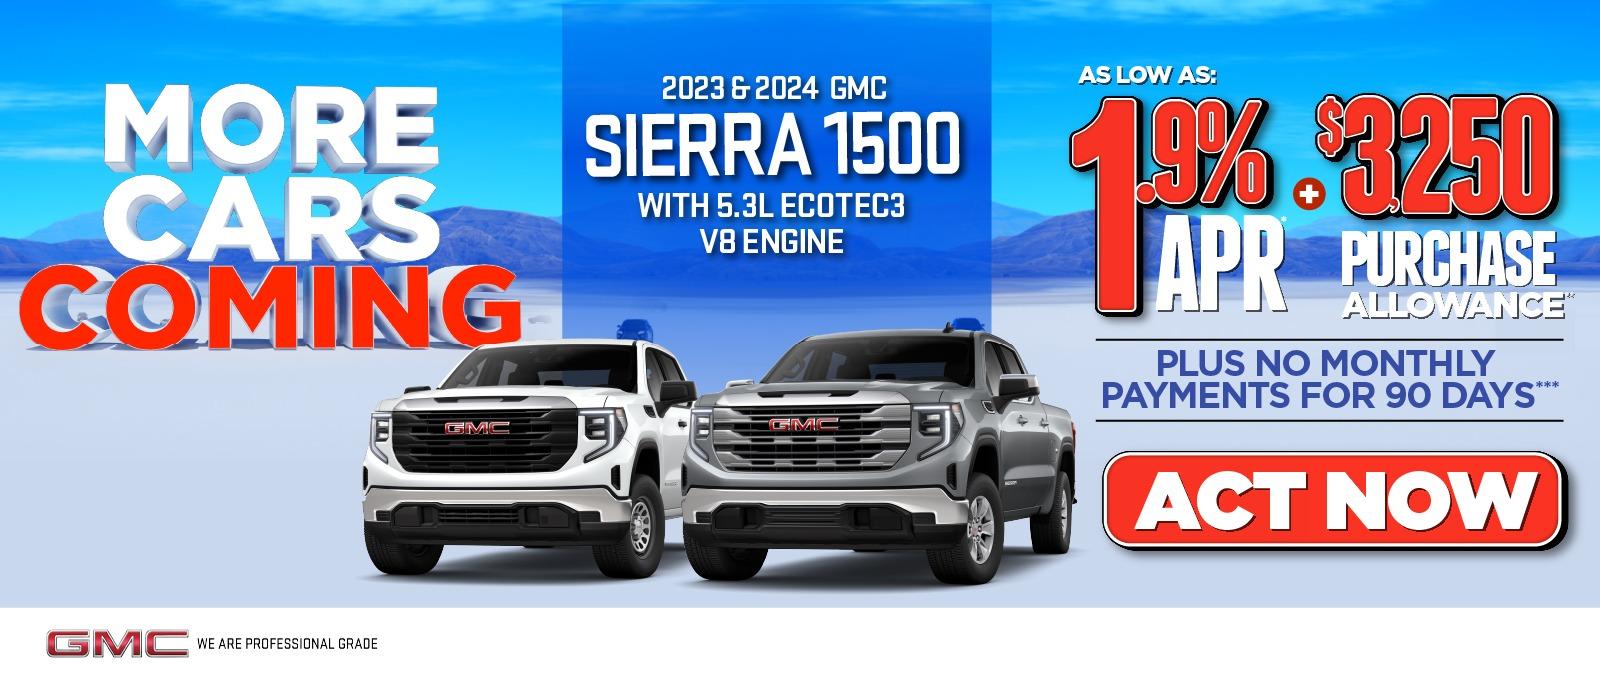 New 2023 & 2024 Sierra 1500 with 5.3L Ecotec3 V8 Engine - As low as 1.9% APR, plus no monthly payments for 90 days. Act Now.